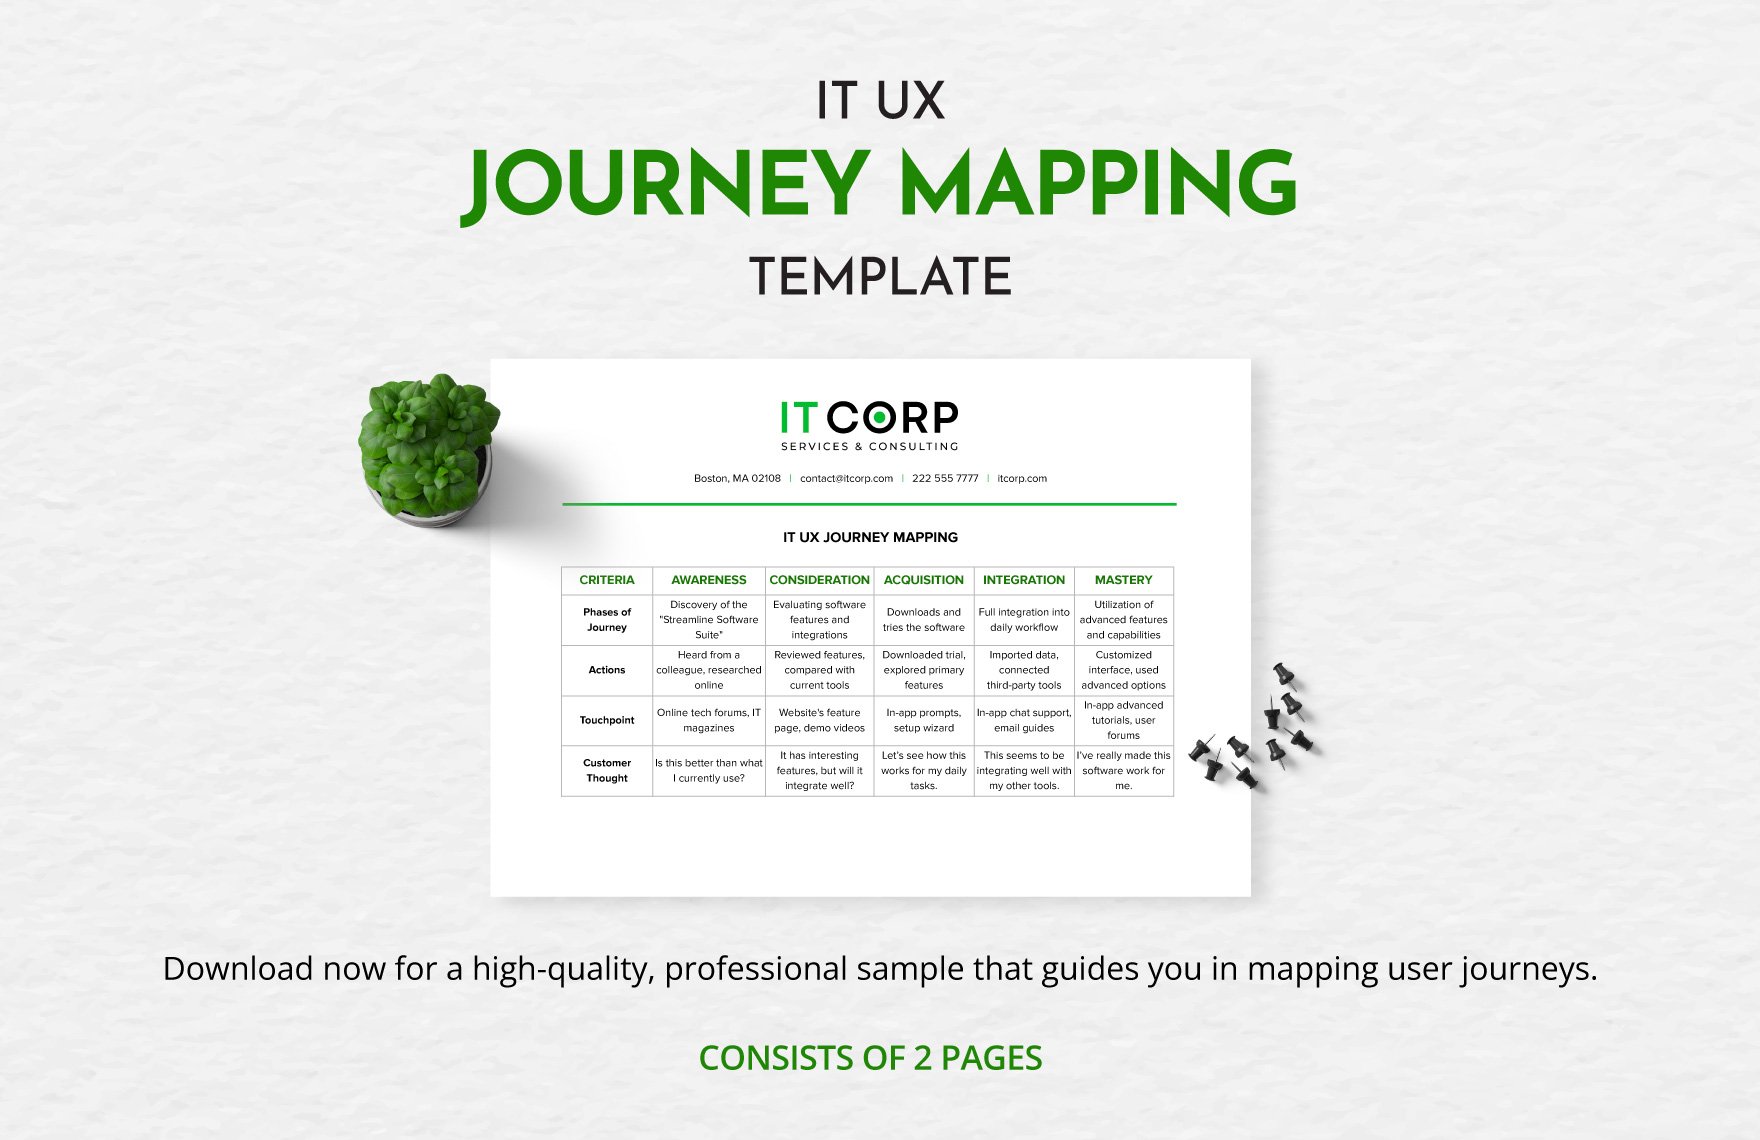 IT UX Journey Mapping Template